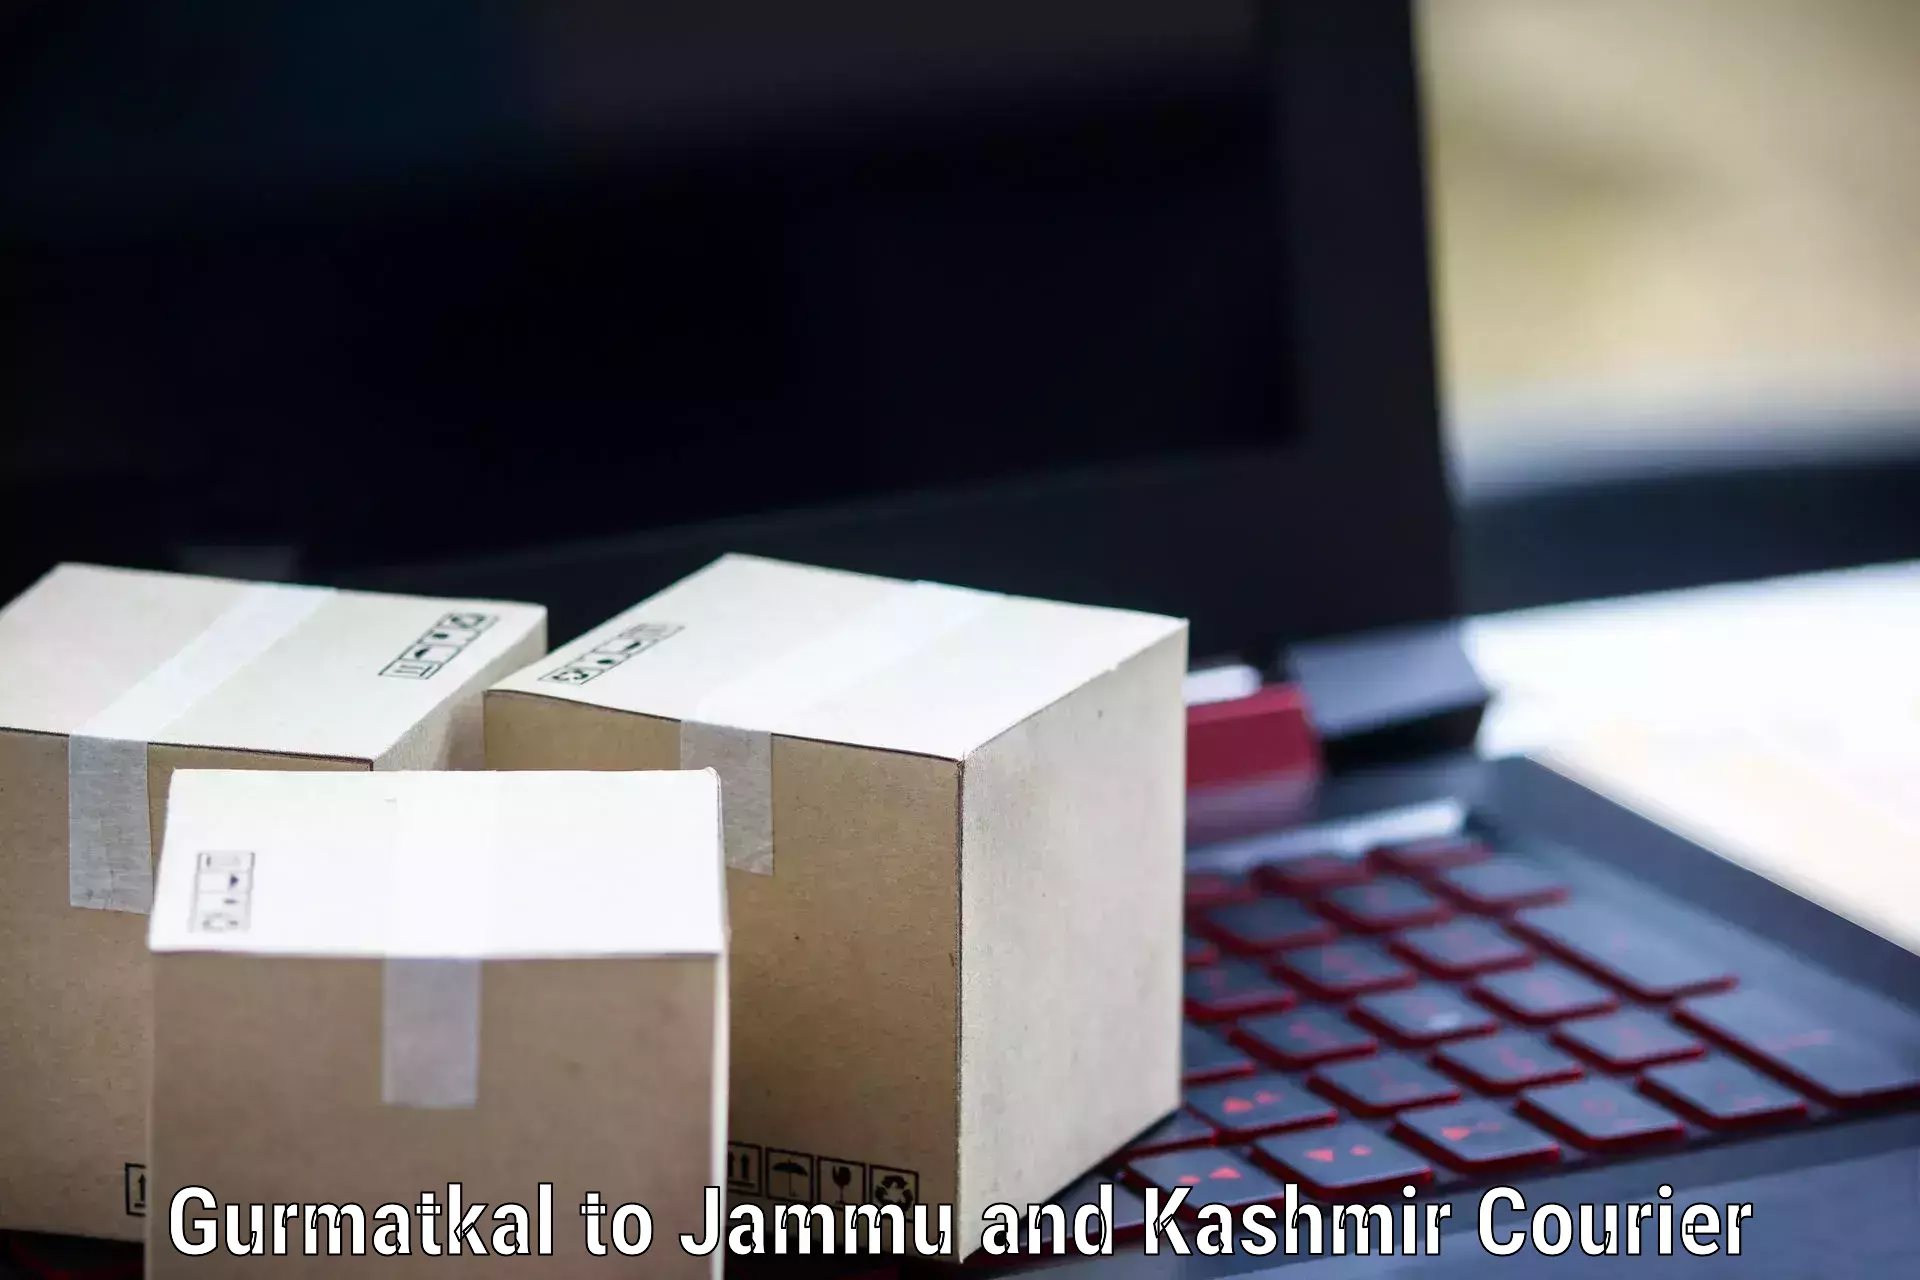 Global courier networks Gurmatkal to Katra